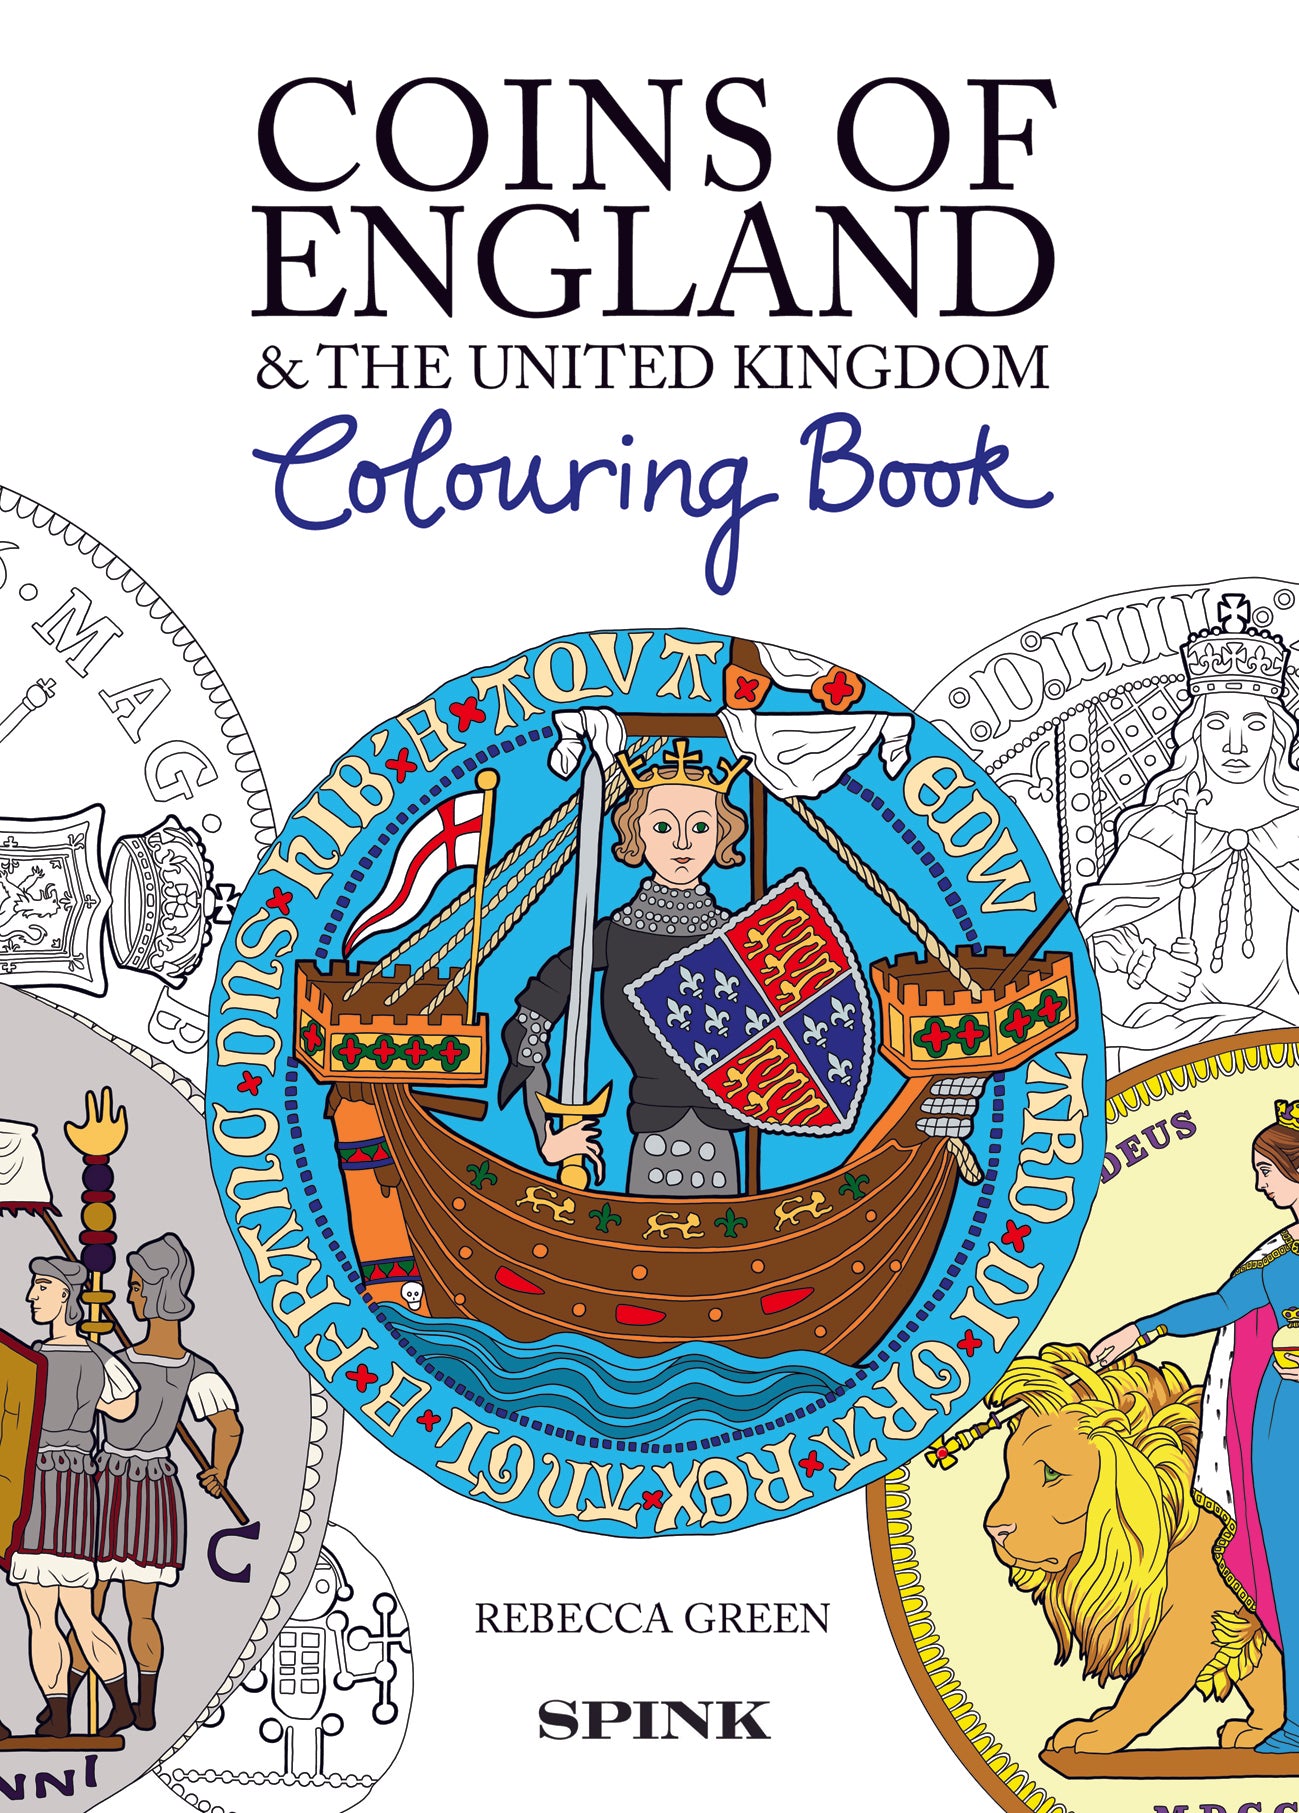 Coins of England & The United Kingdom Colouring Book by Rebecca Green